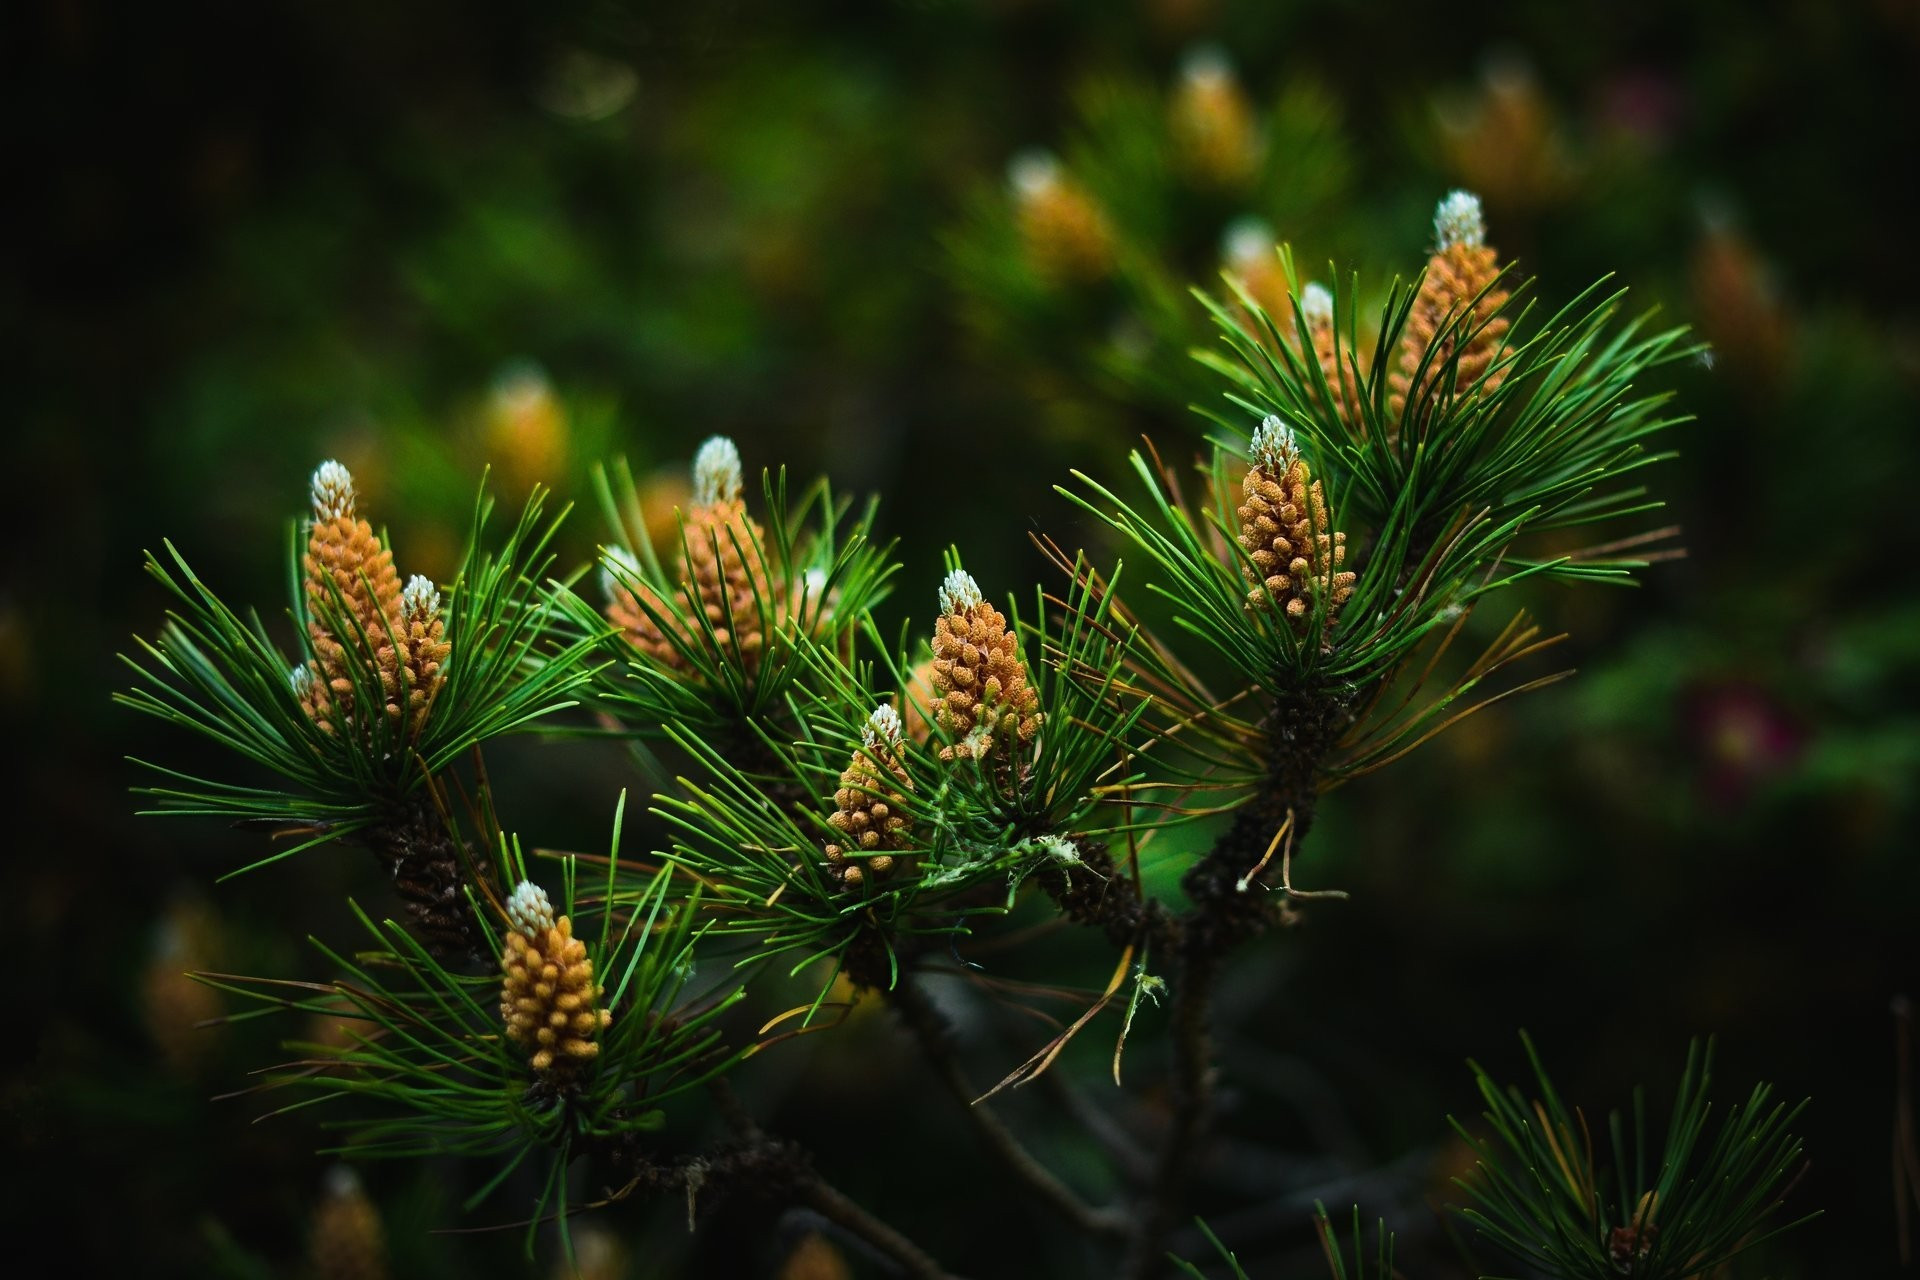 Small pine cones on branches with green needles